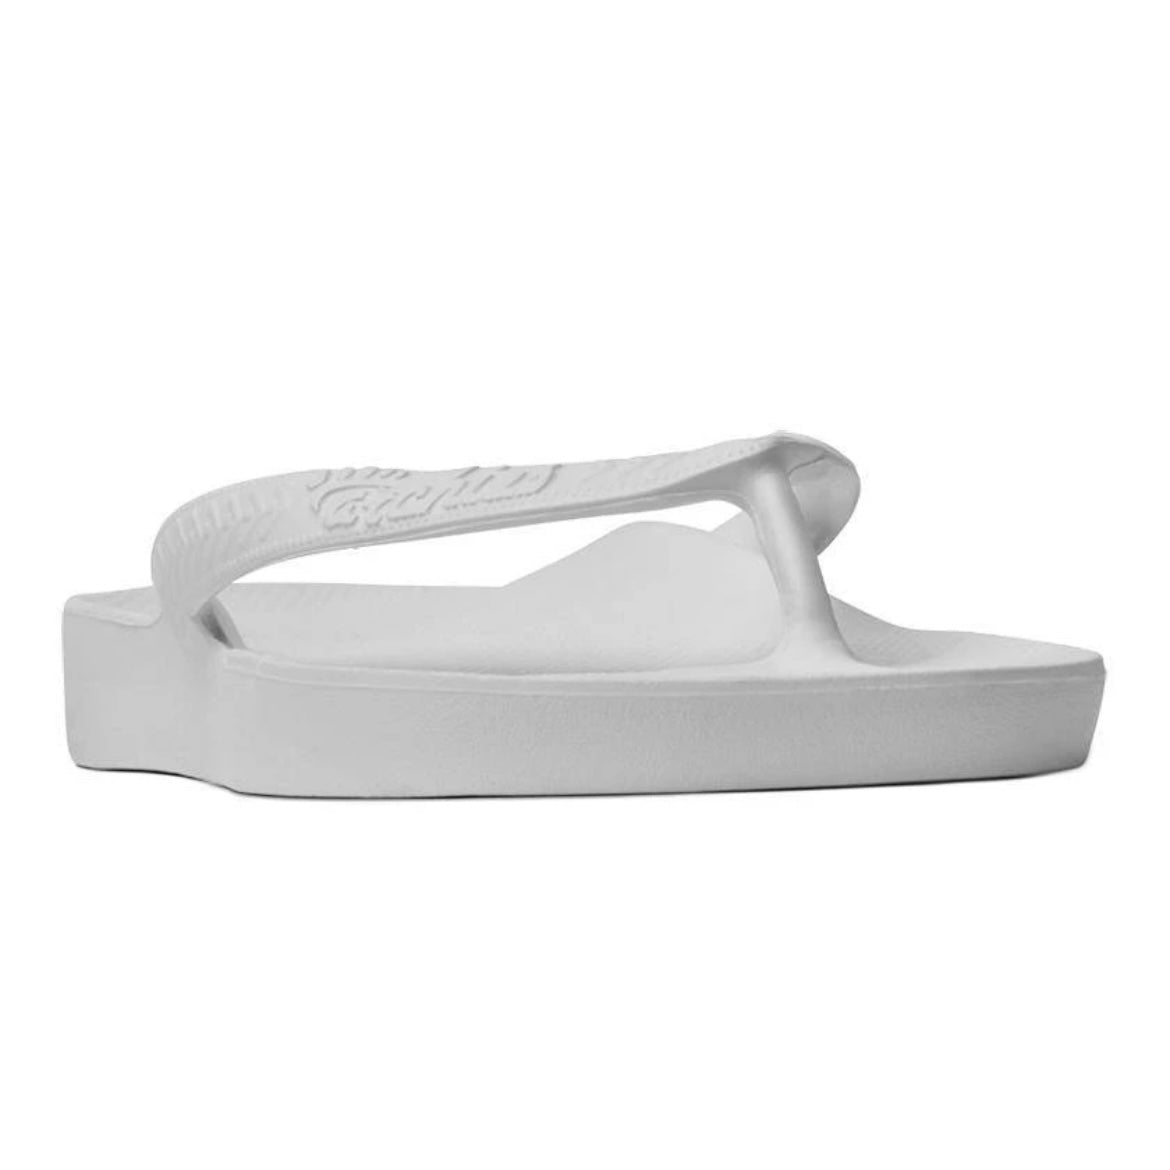 Archies White Arch Support Thongs Flip Flop Orthotic